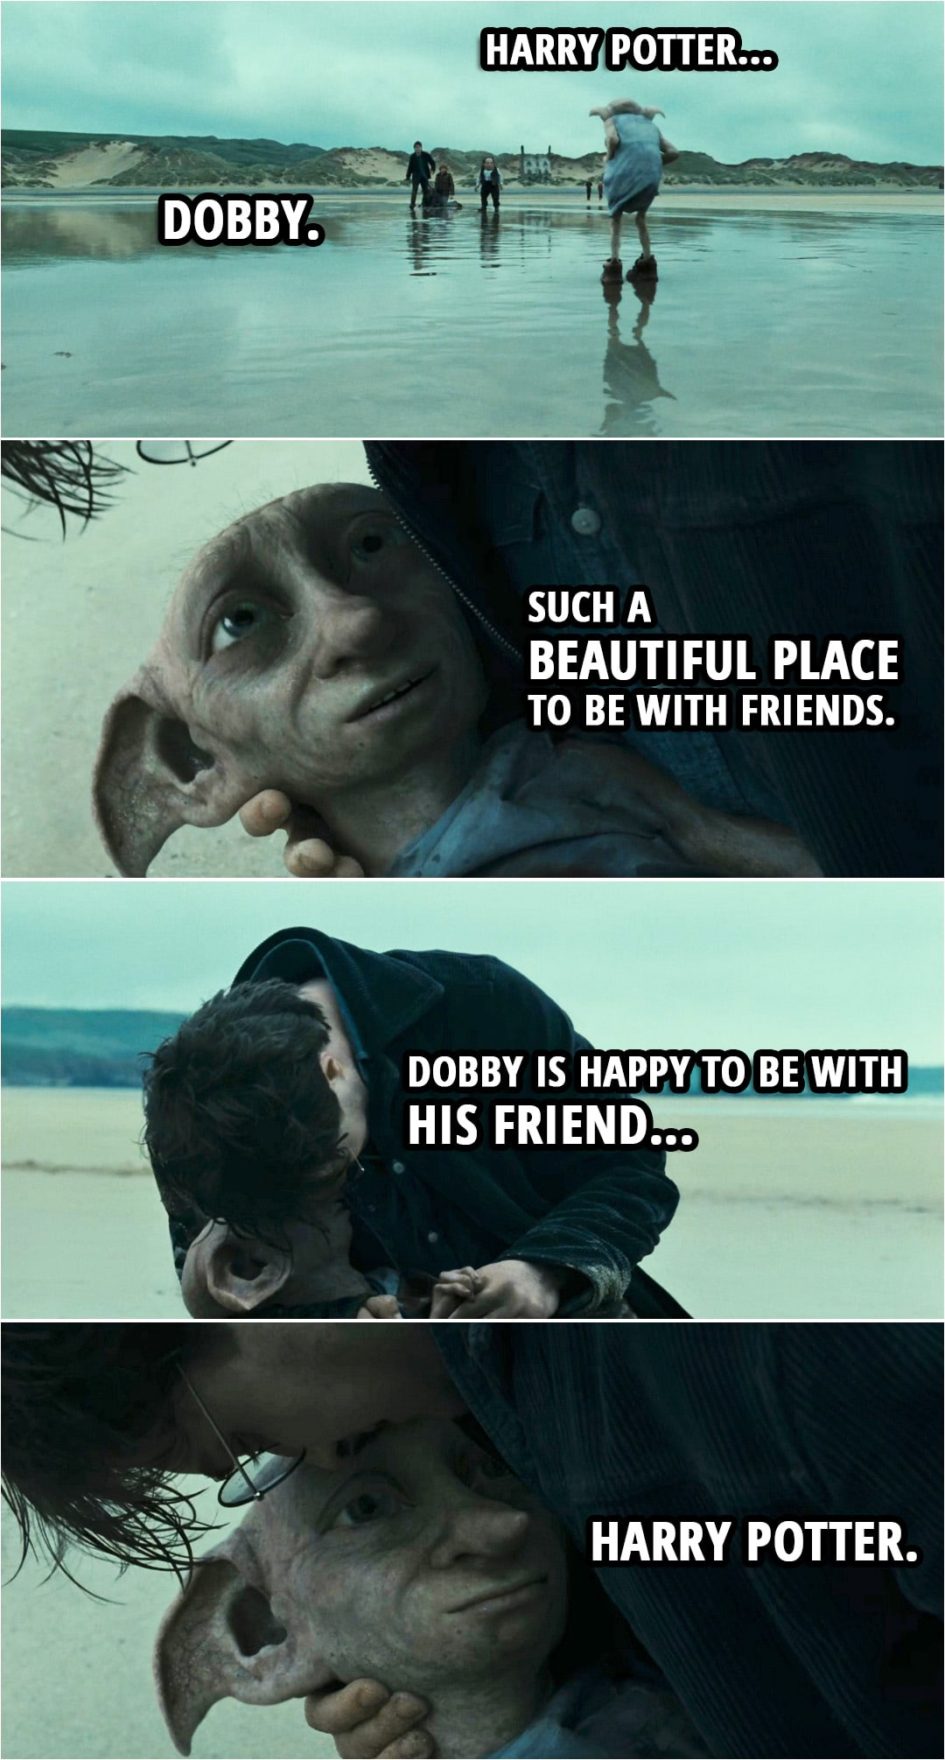 Quote from Harry Potter and the Deathly Hallows: Part 1 (2010) | Dobby: Such a beautiful place to be with friends. Dobby is happy to be with his friend... Harry Potter.